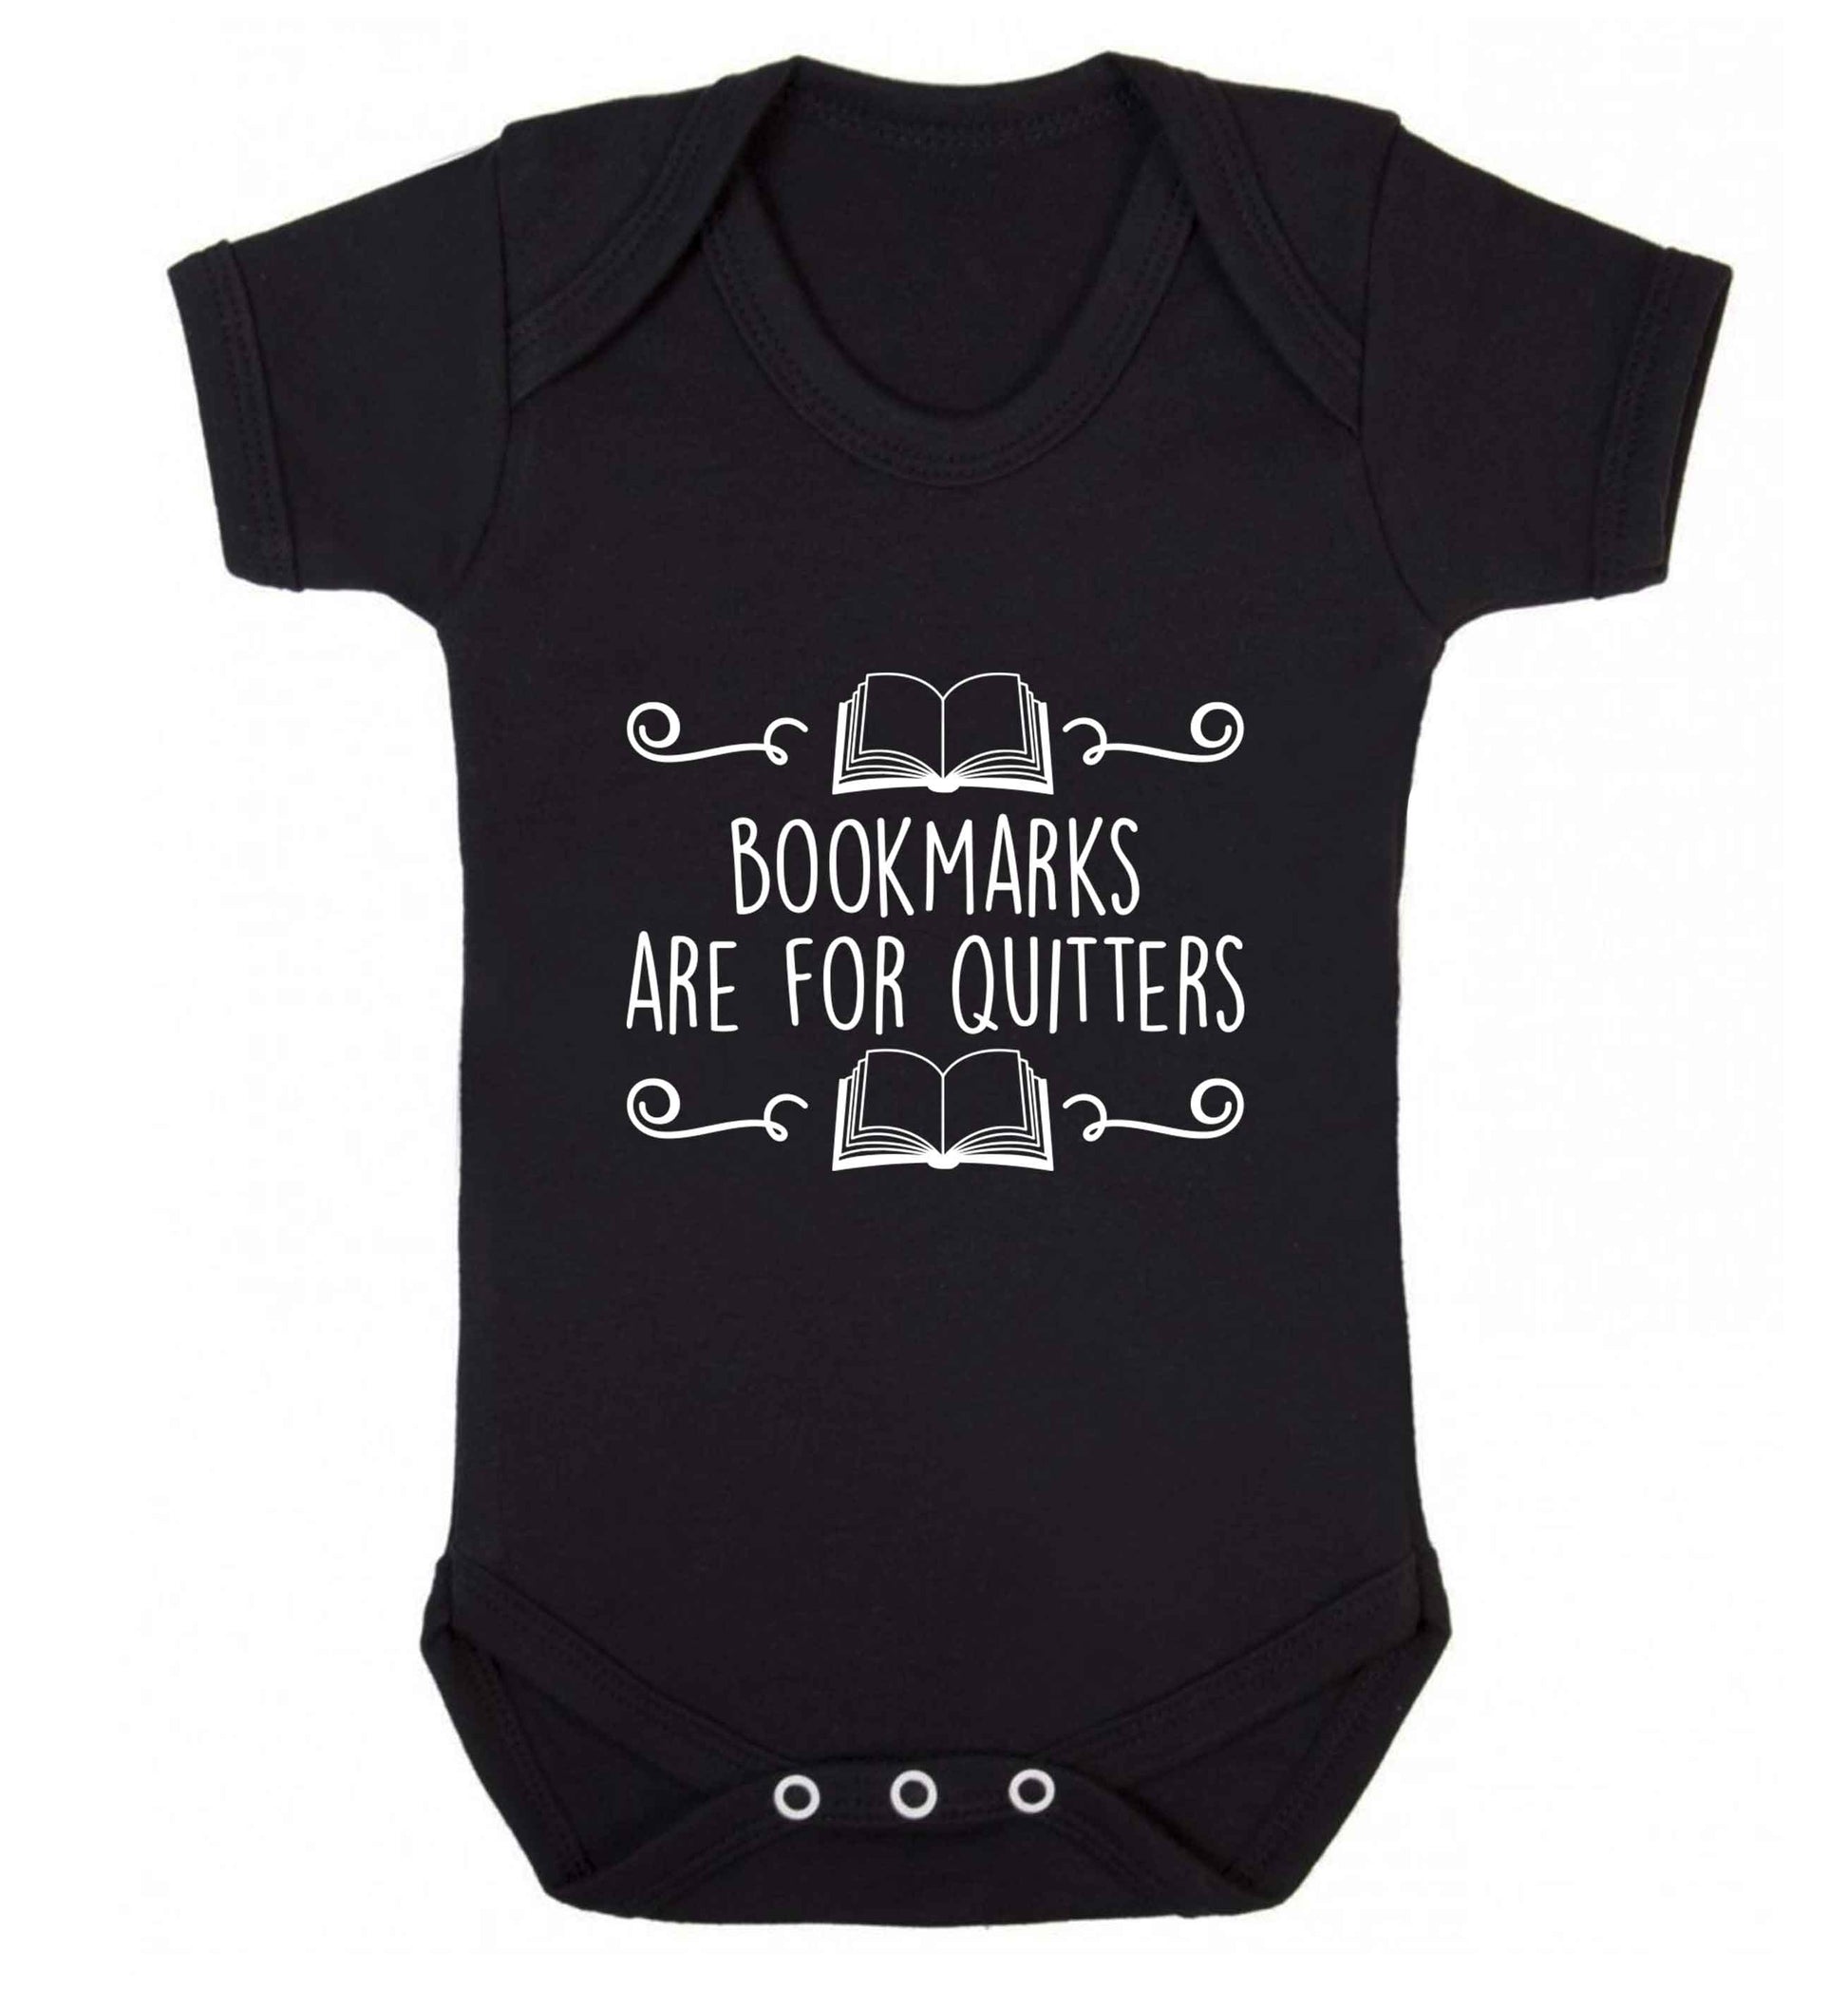 Bookmarks are for quitters baby vest black 18-24 months